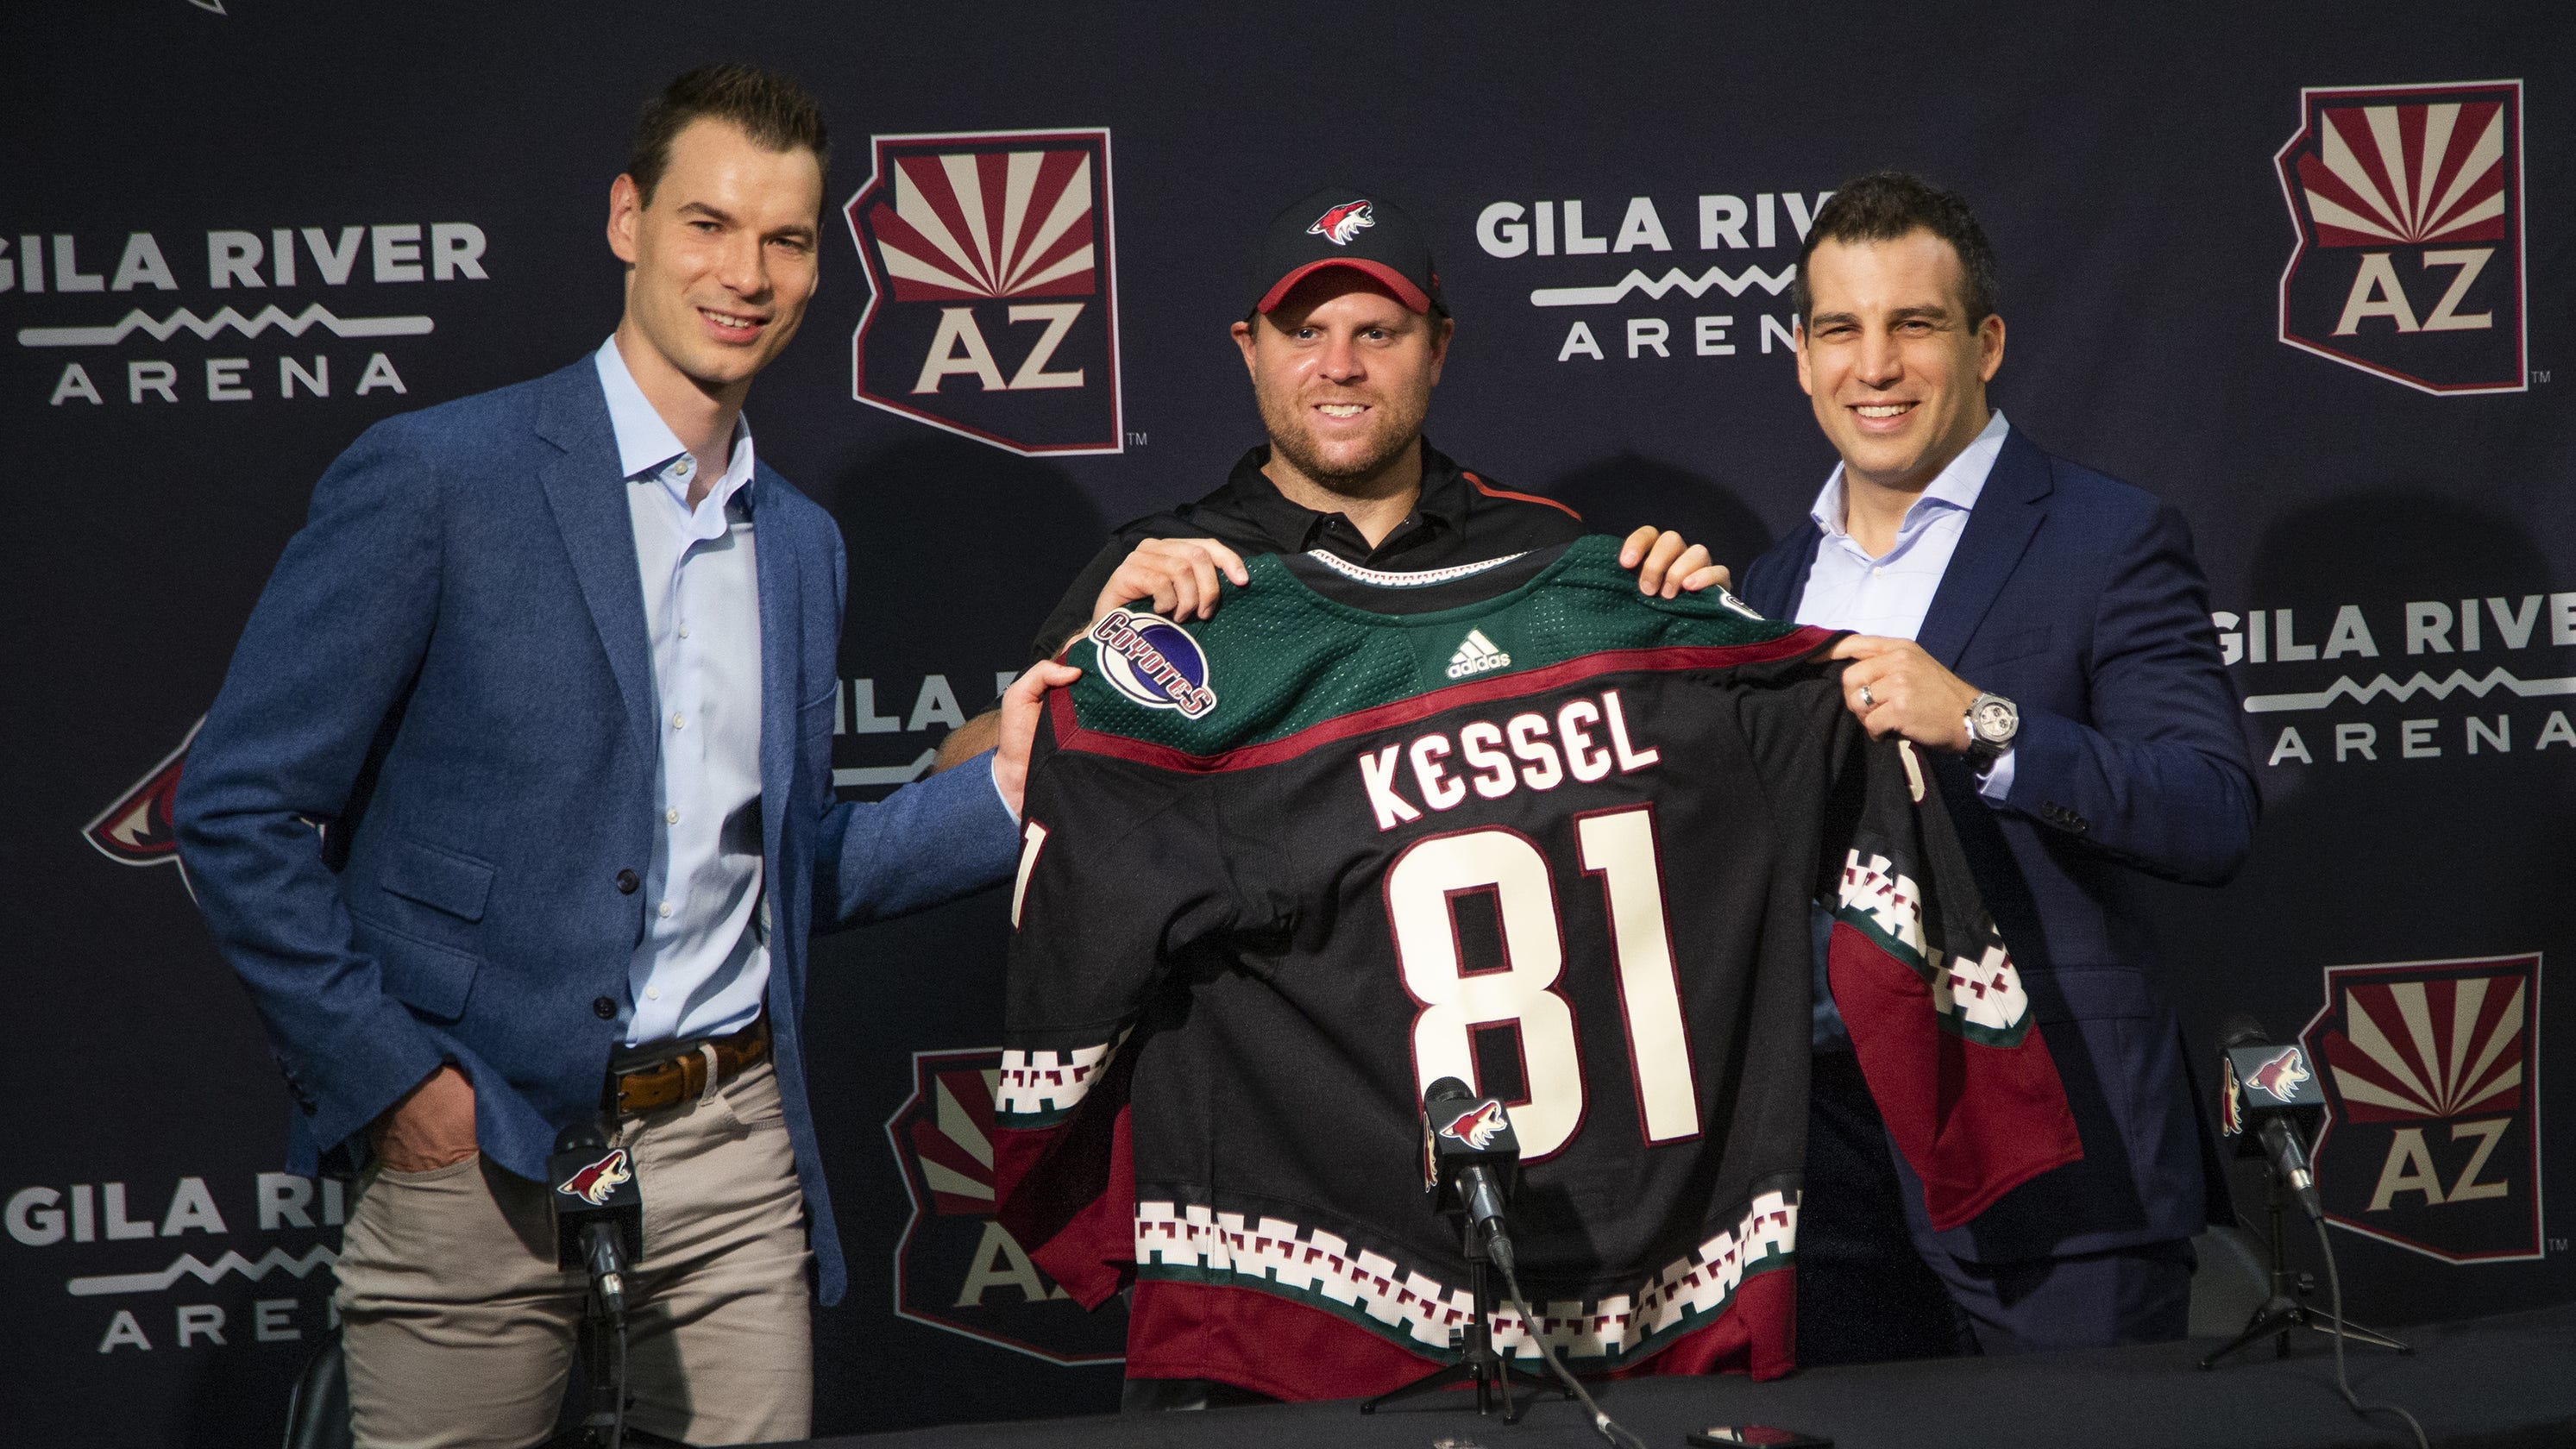 For Arizona Coyotes, expectations high with new owner Alex Meruelo, Phil Kessel